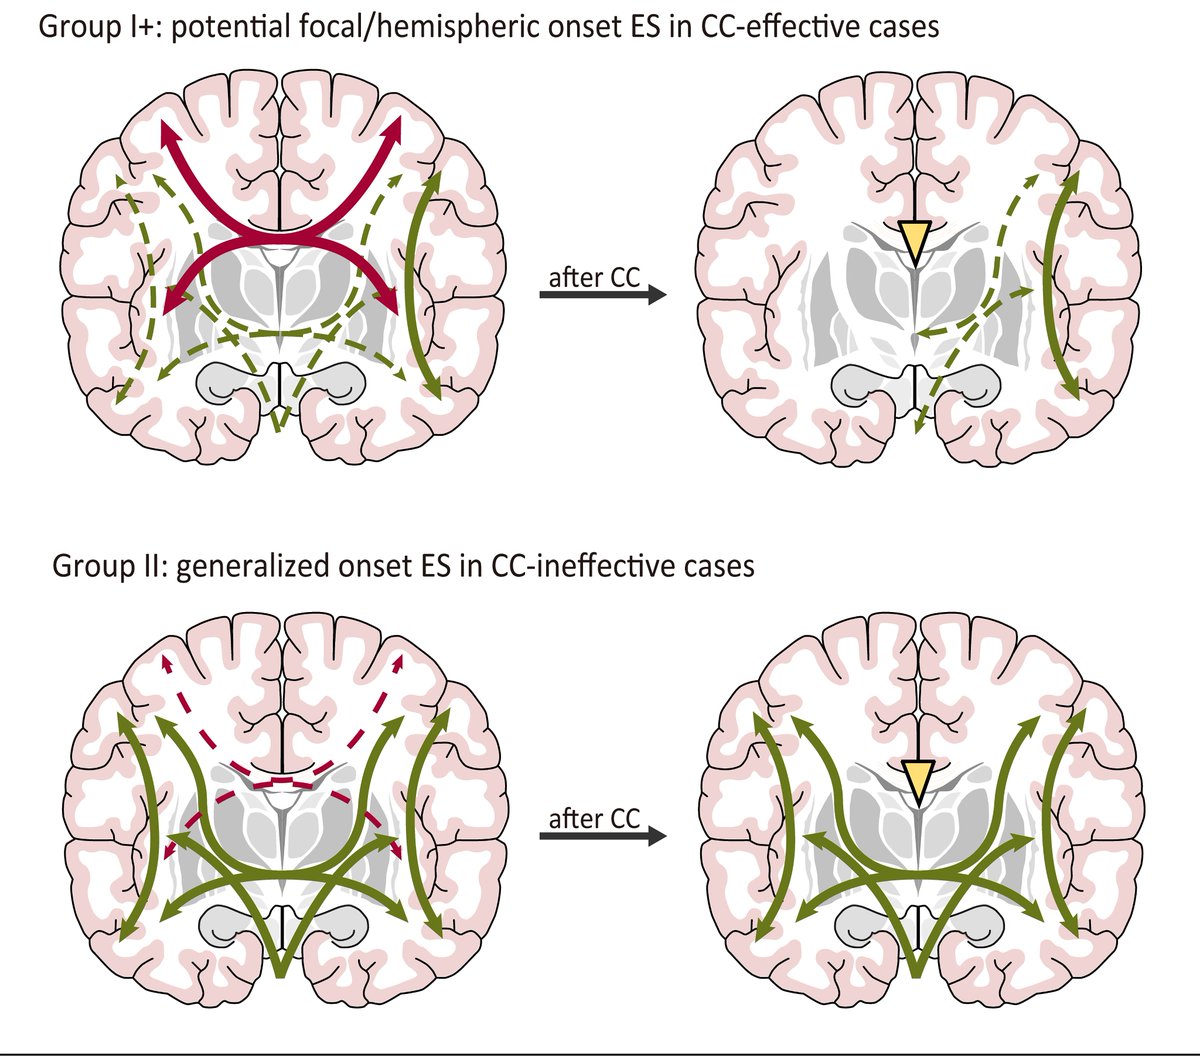 Comparing late‐onset epileptic spasm outcomes after corpus callosotomy and subsequent disconnection surgery between post‐encephalitis/encephalopathy and non‐encephalitis/encephalopathy onlinelibrary.wiley.com/doi/10.1002/ep… 

#epilepsy #ILAE #epilepticspasm  #corpuscallosotomy @WileyNeuro